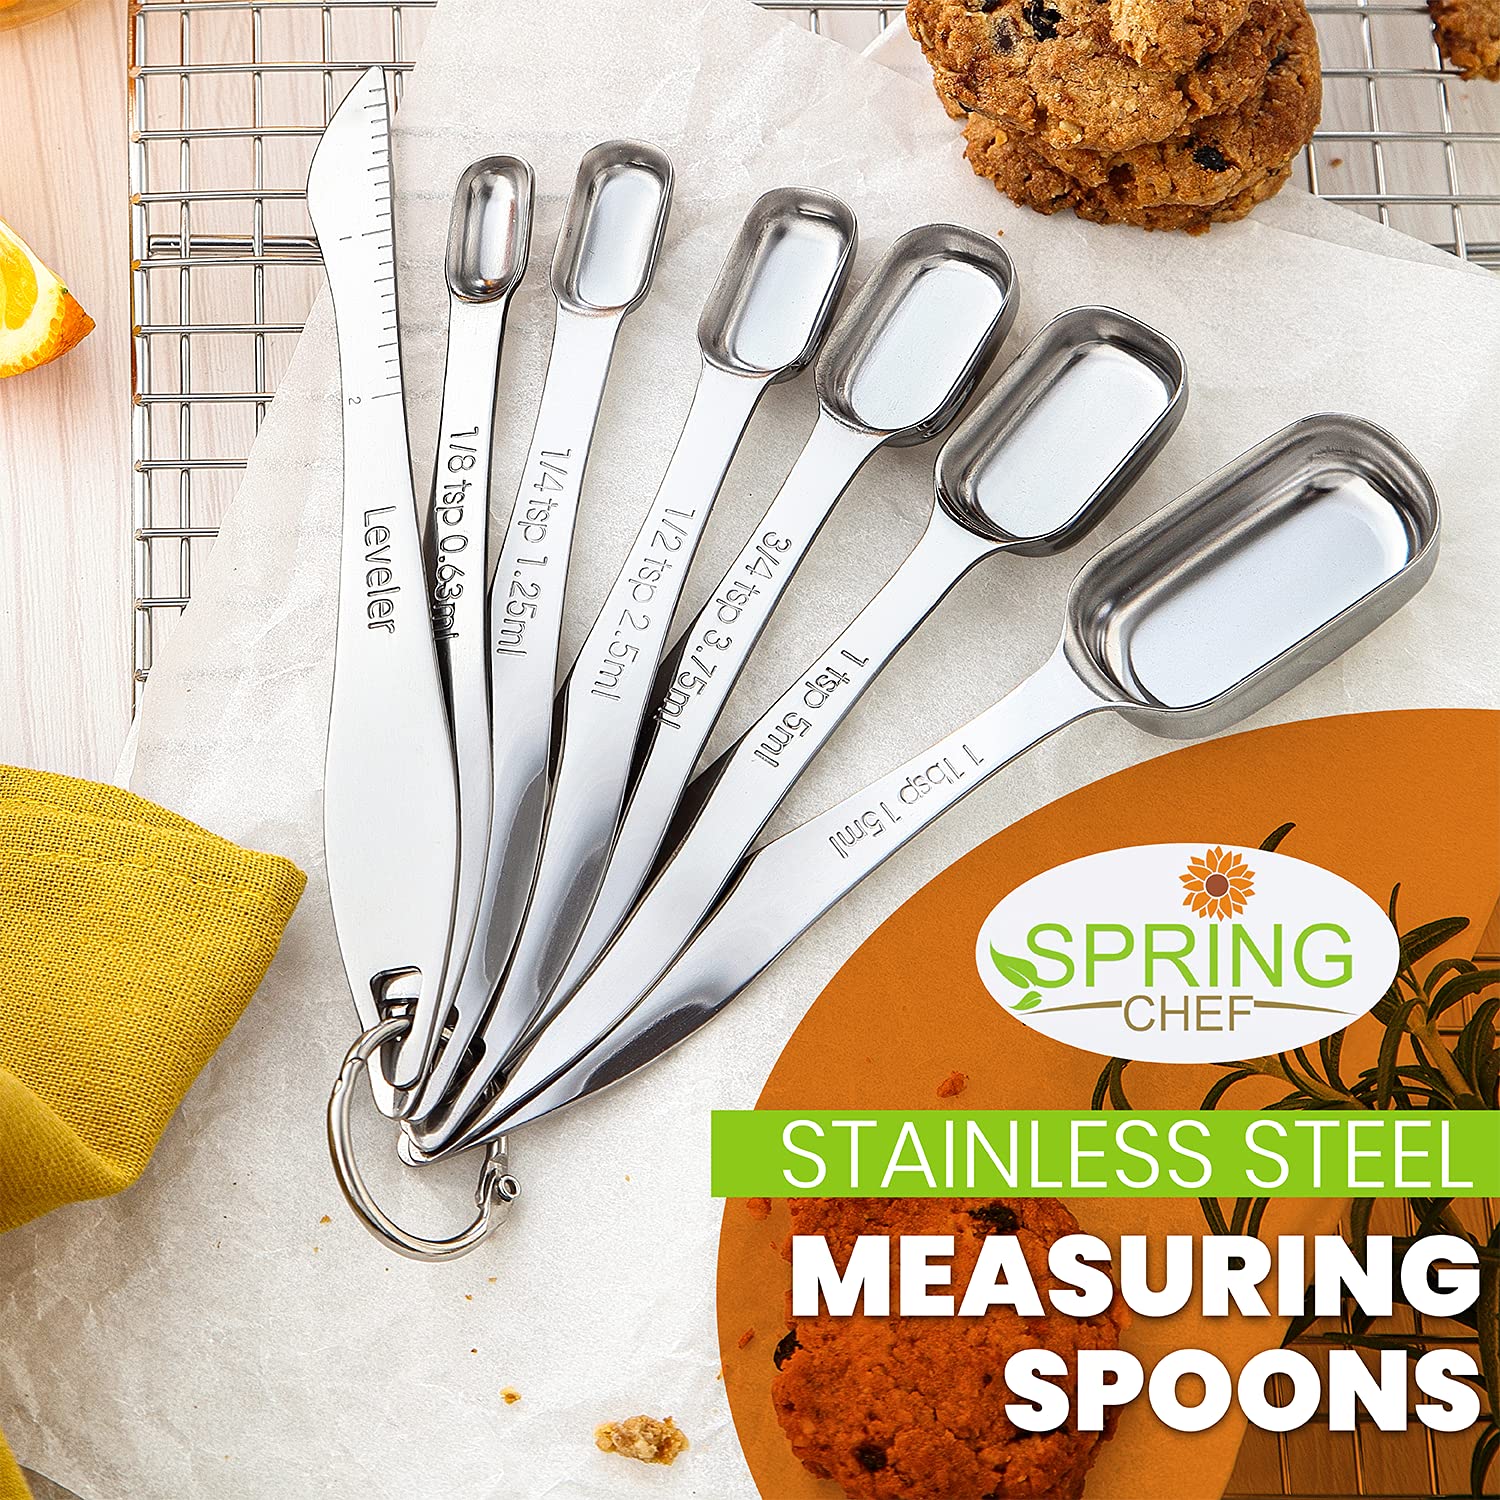 Spring Chef Stainless Steel Measuring Spoons Set of 7 with Leveler, Rectangular Metal Teaspoon & Tablespoon Measuring Spoons for Dry & Liquid Ingredients - Nesting Kitchen Gadgets For Baking & Cooking